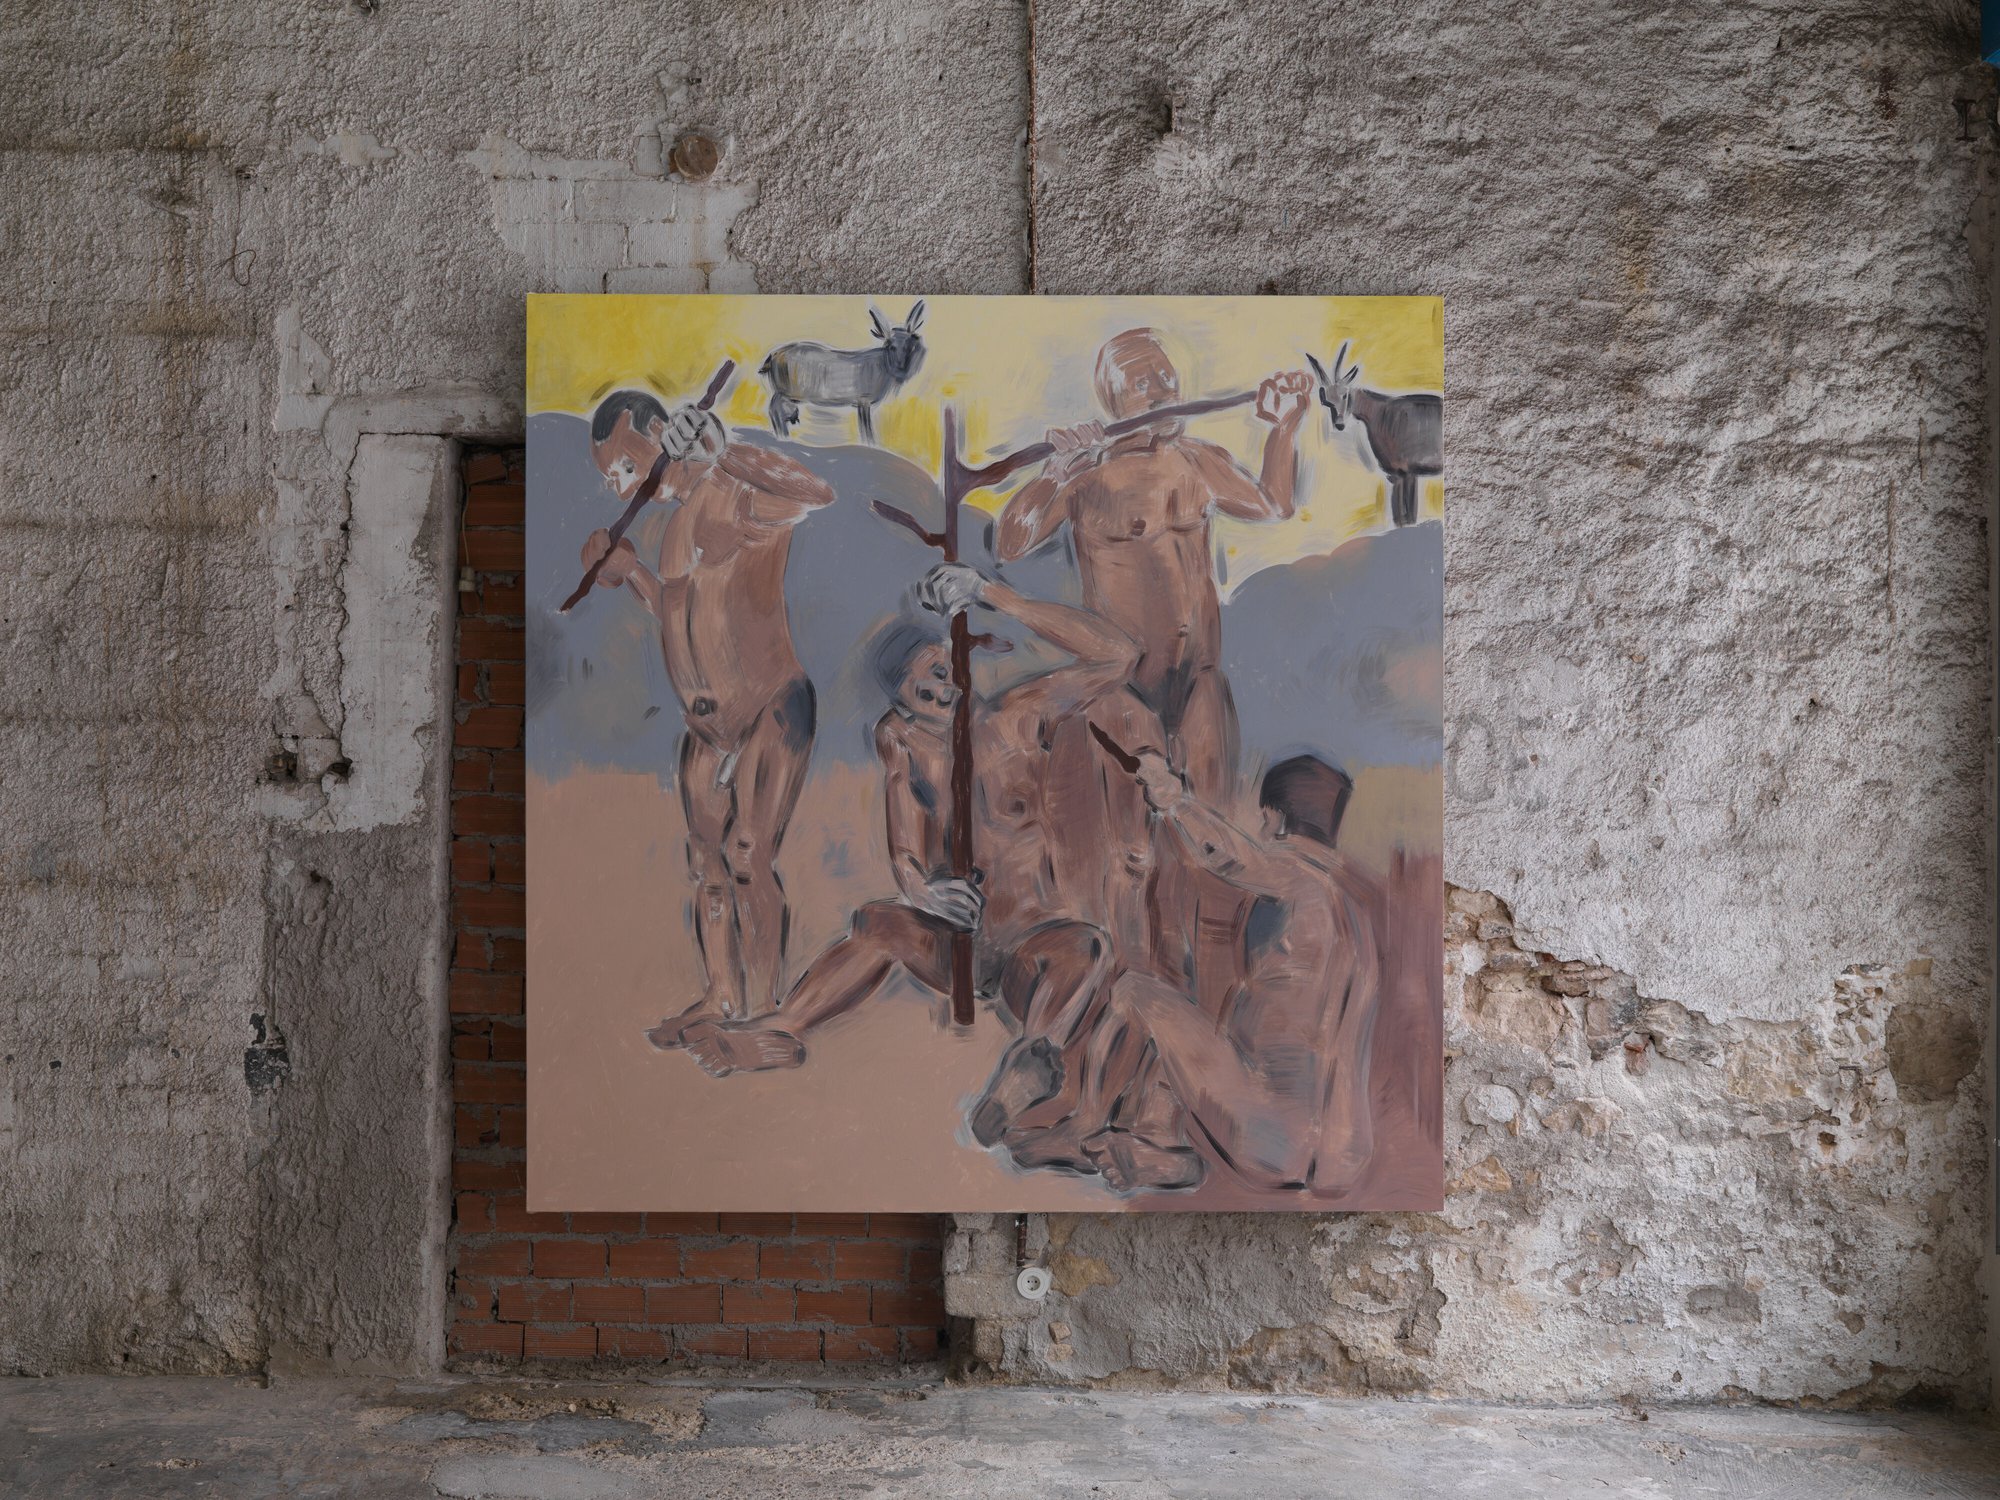 Apostolos Georgiou, Untitled, acrylic on canvas, 230 x 230 cm, 2020. Installation view, Ένας Ένας - One by One, RODEO, Piraeus, 2020